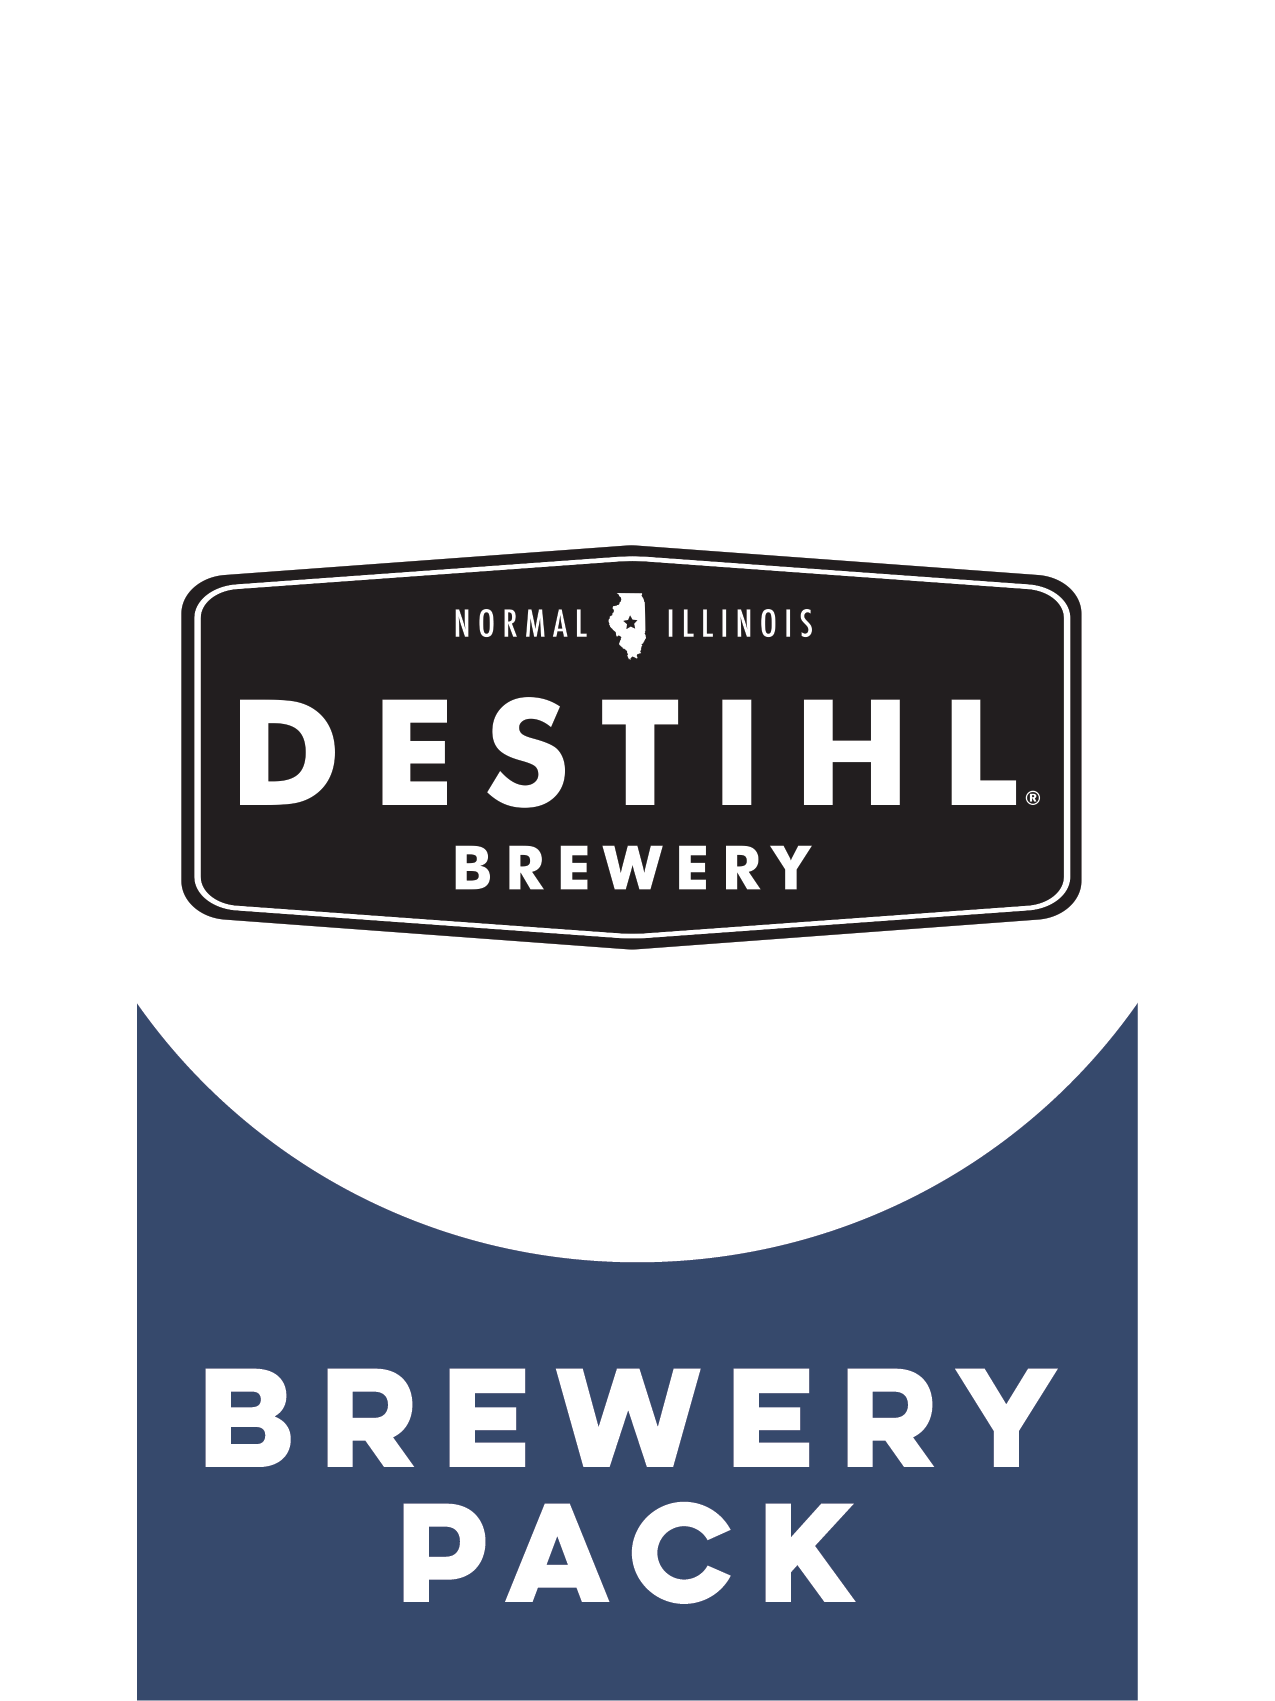 -Destihl- Destihl Brewery Pack-Packs & Cases- Only @ Beer Republic - The best online beer store for American & Canadian craft beer - Buy beer online from the USA and Canada - Bier online kopen - Amerikaans bier kopen - Craft beer store - Craft beer kopen - Amerikanisch bier kaufen - Bier online kaufen - Acheter biere online - IPA - Stout - Porter - New England IPA - Hazy IPA - Imperial Stout - Barrel Aged - Barrel Aged Imperial Stout - Brown - Dark beer - Blond - Blonde - Pilsner - Lager - Wheat - Weizen - 